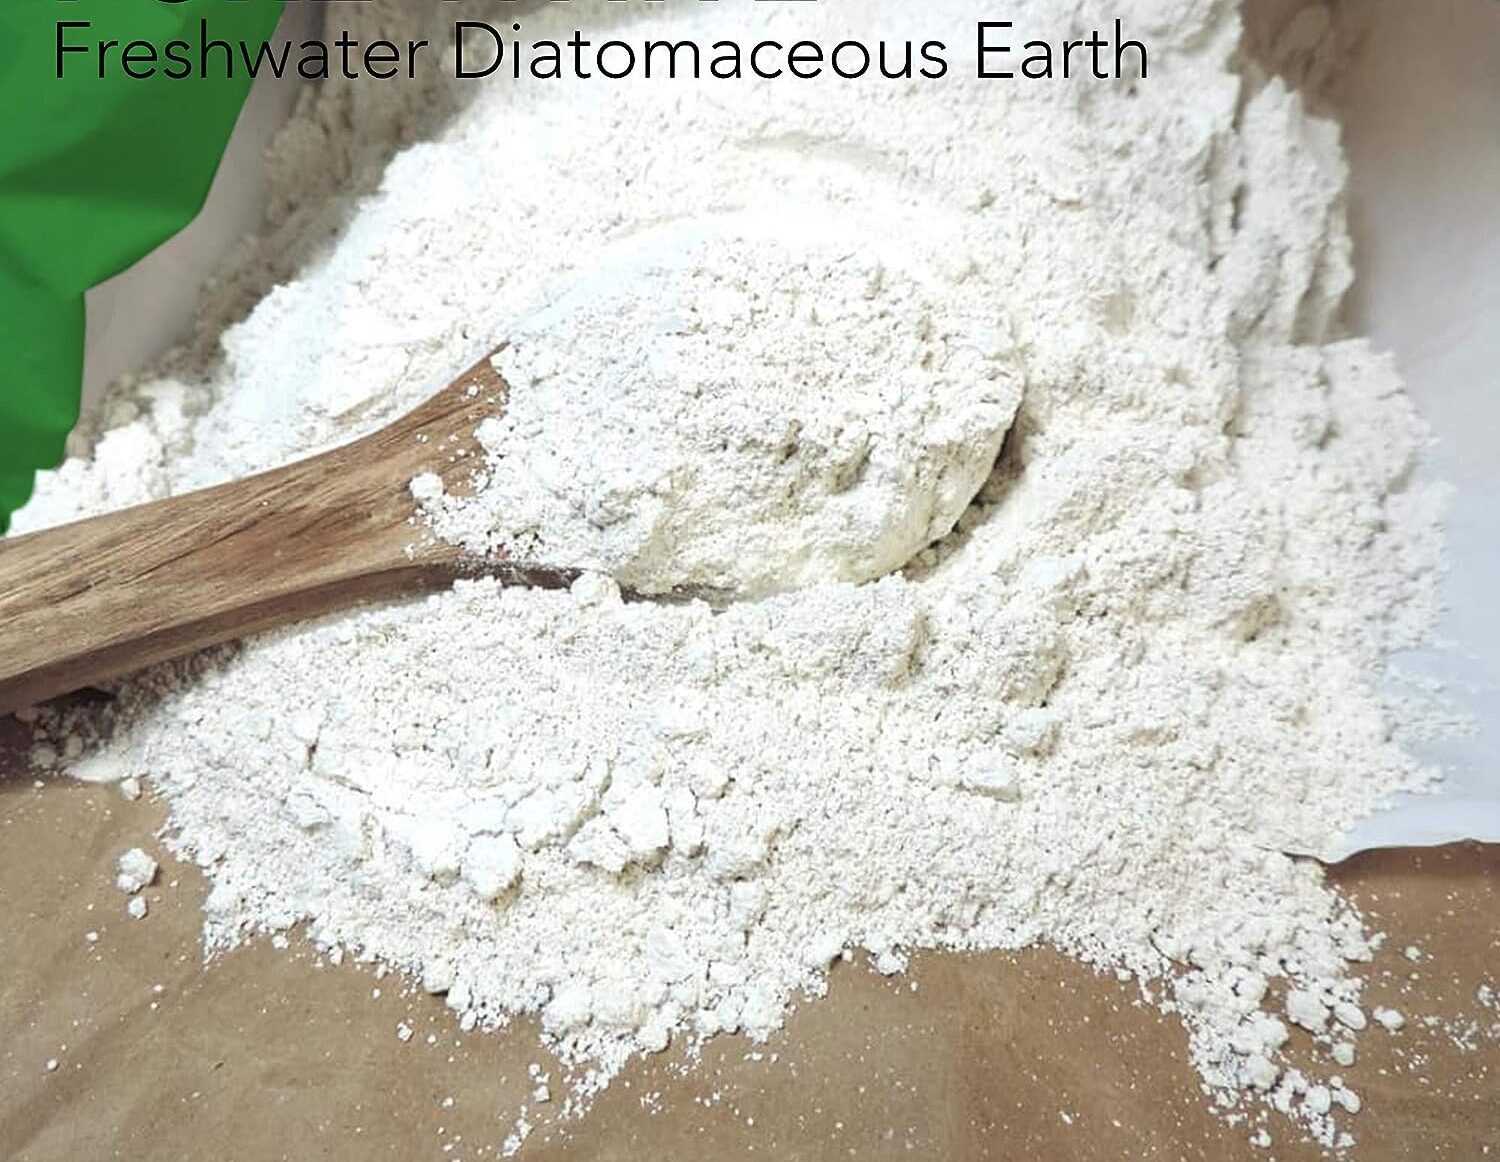 How to use diatomaceous earth for garden pests